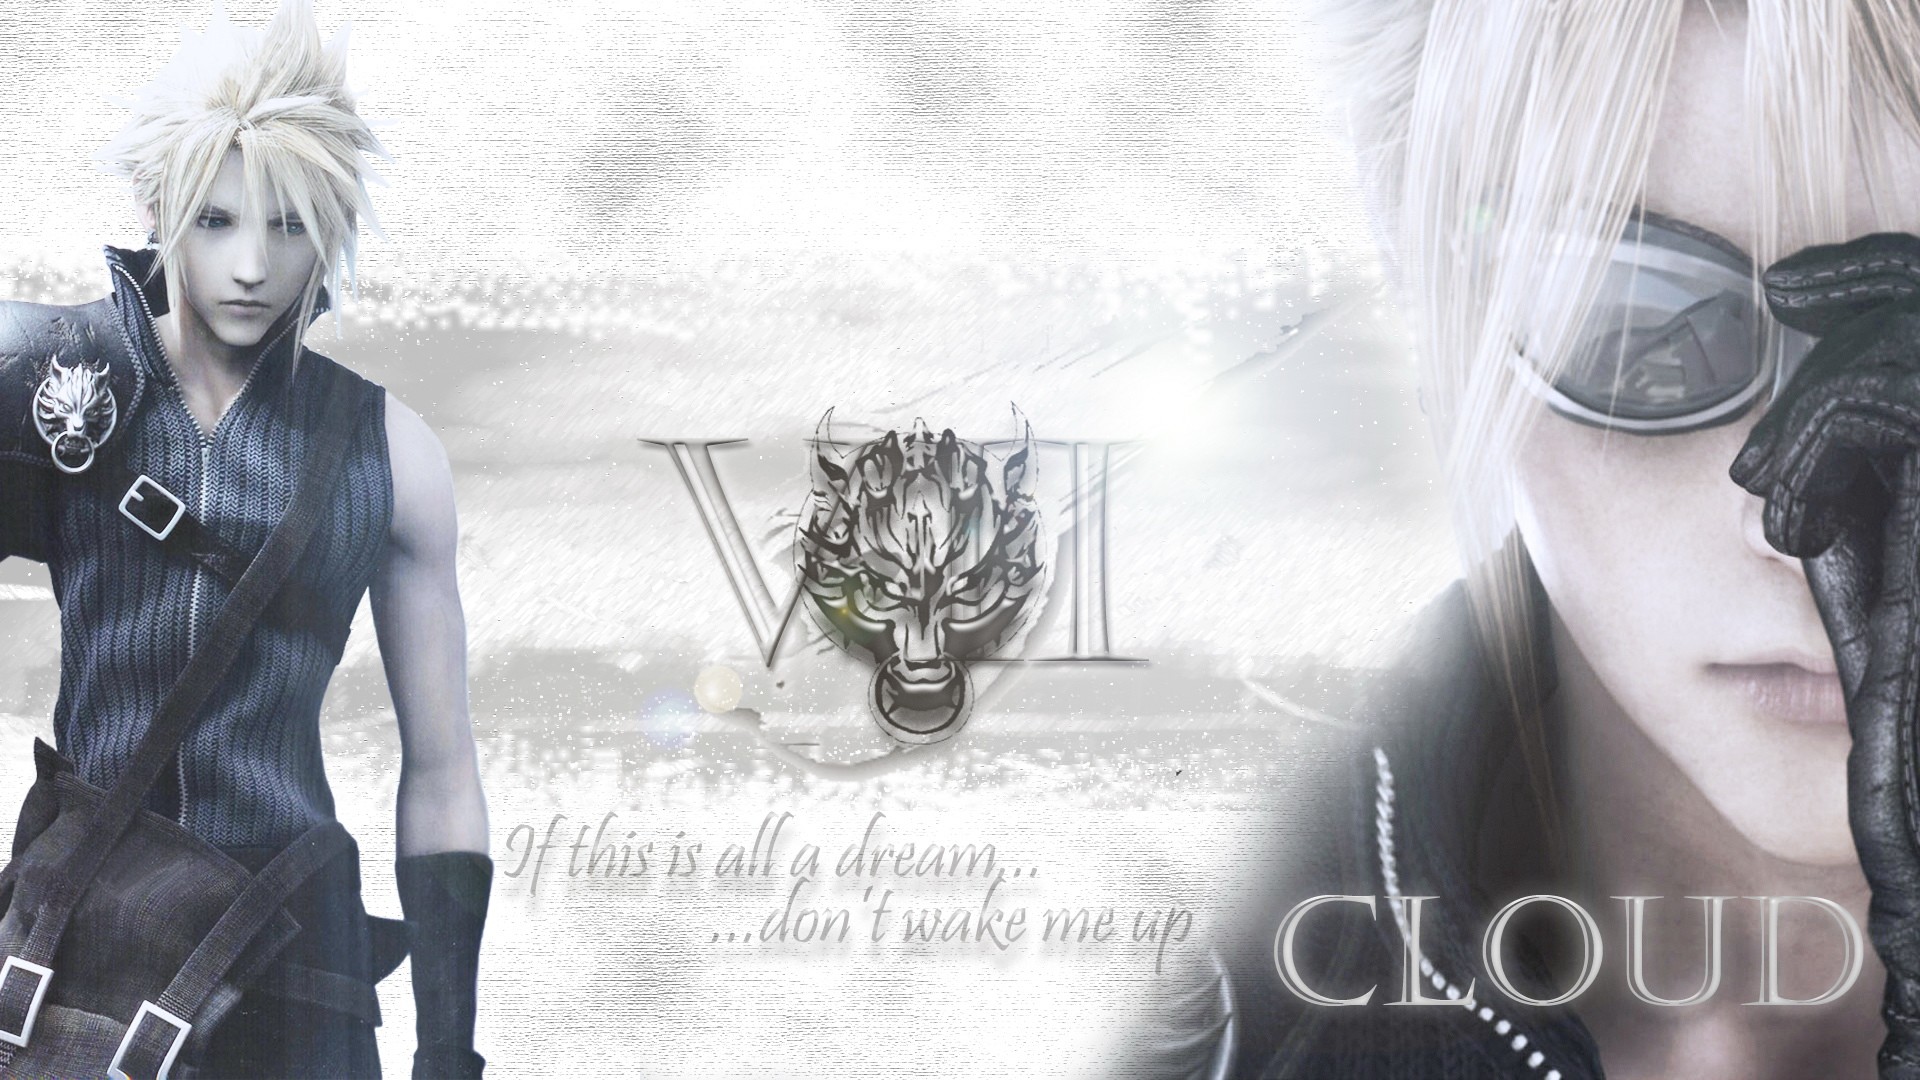 Cloud strife wallpapers